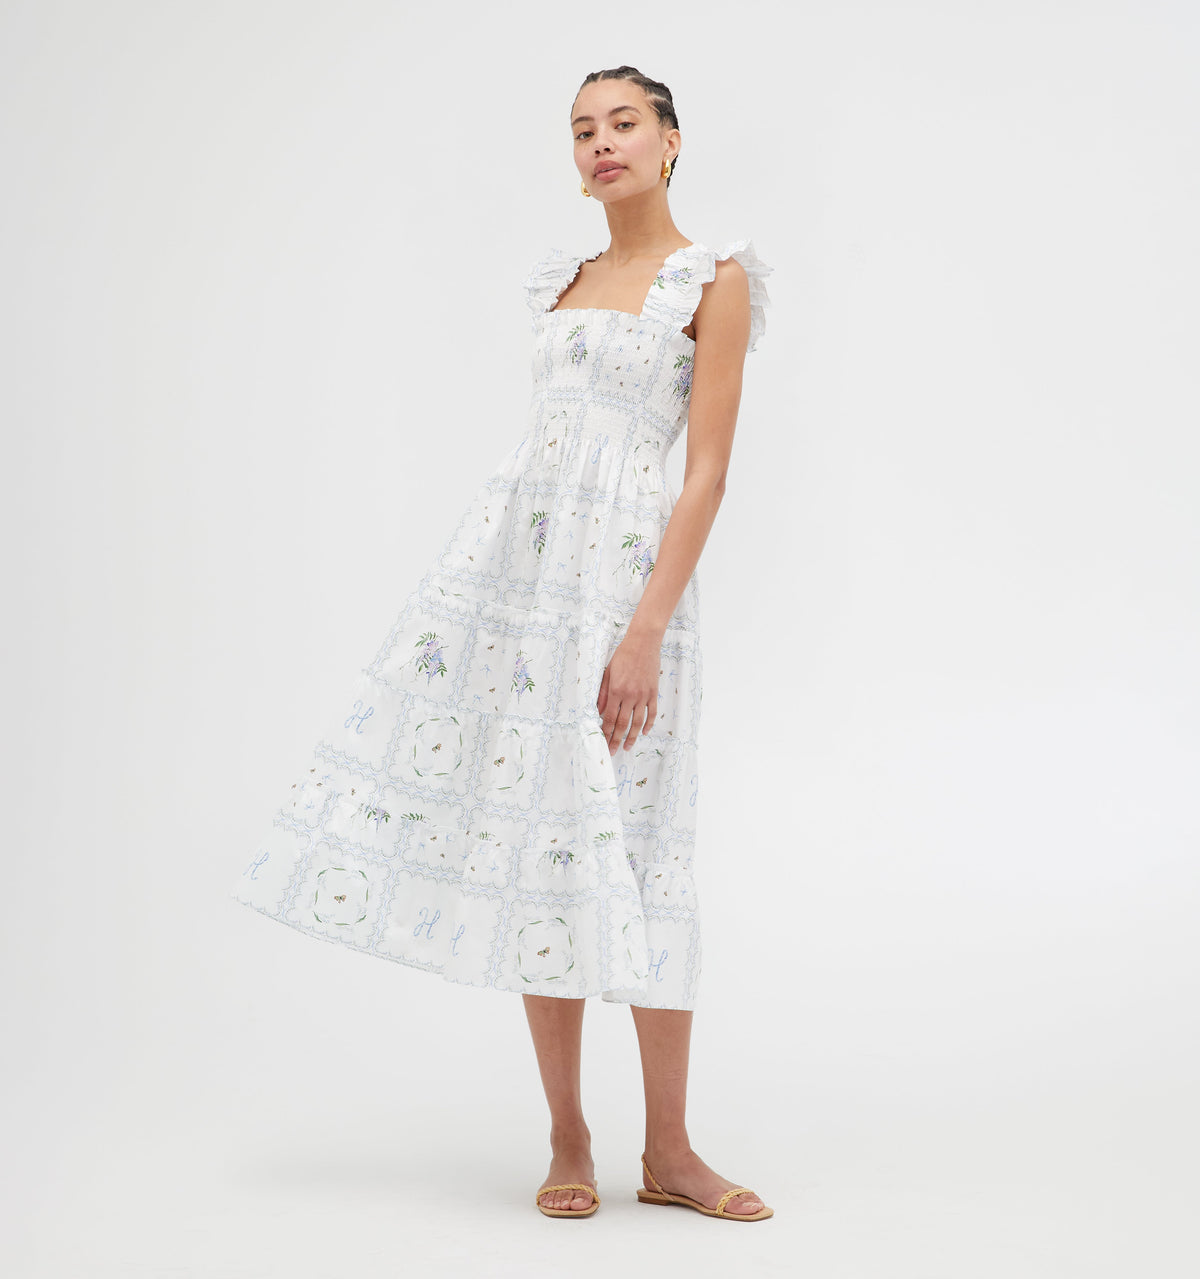 The Ellie Nap Dress in White Floral Patchwork